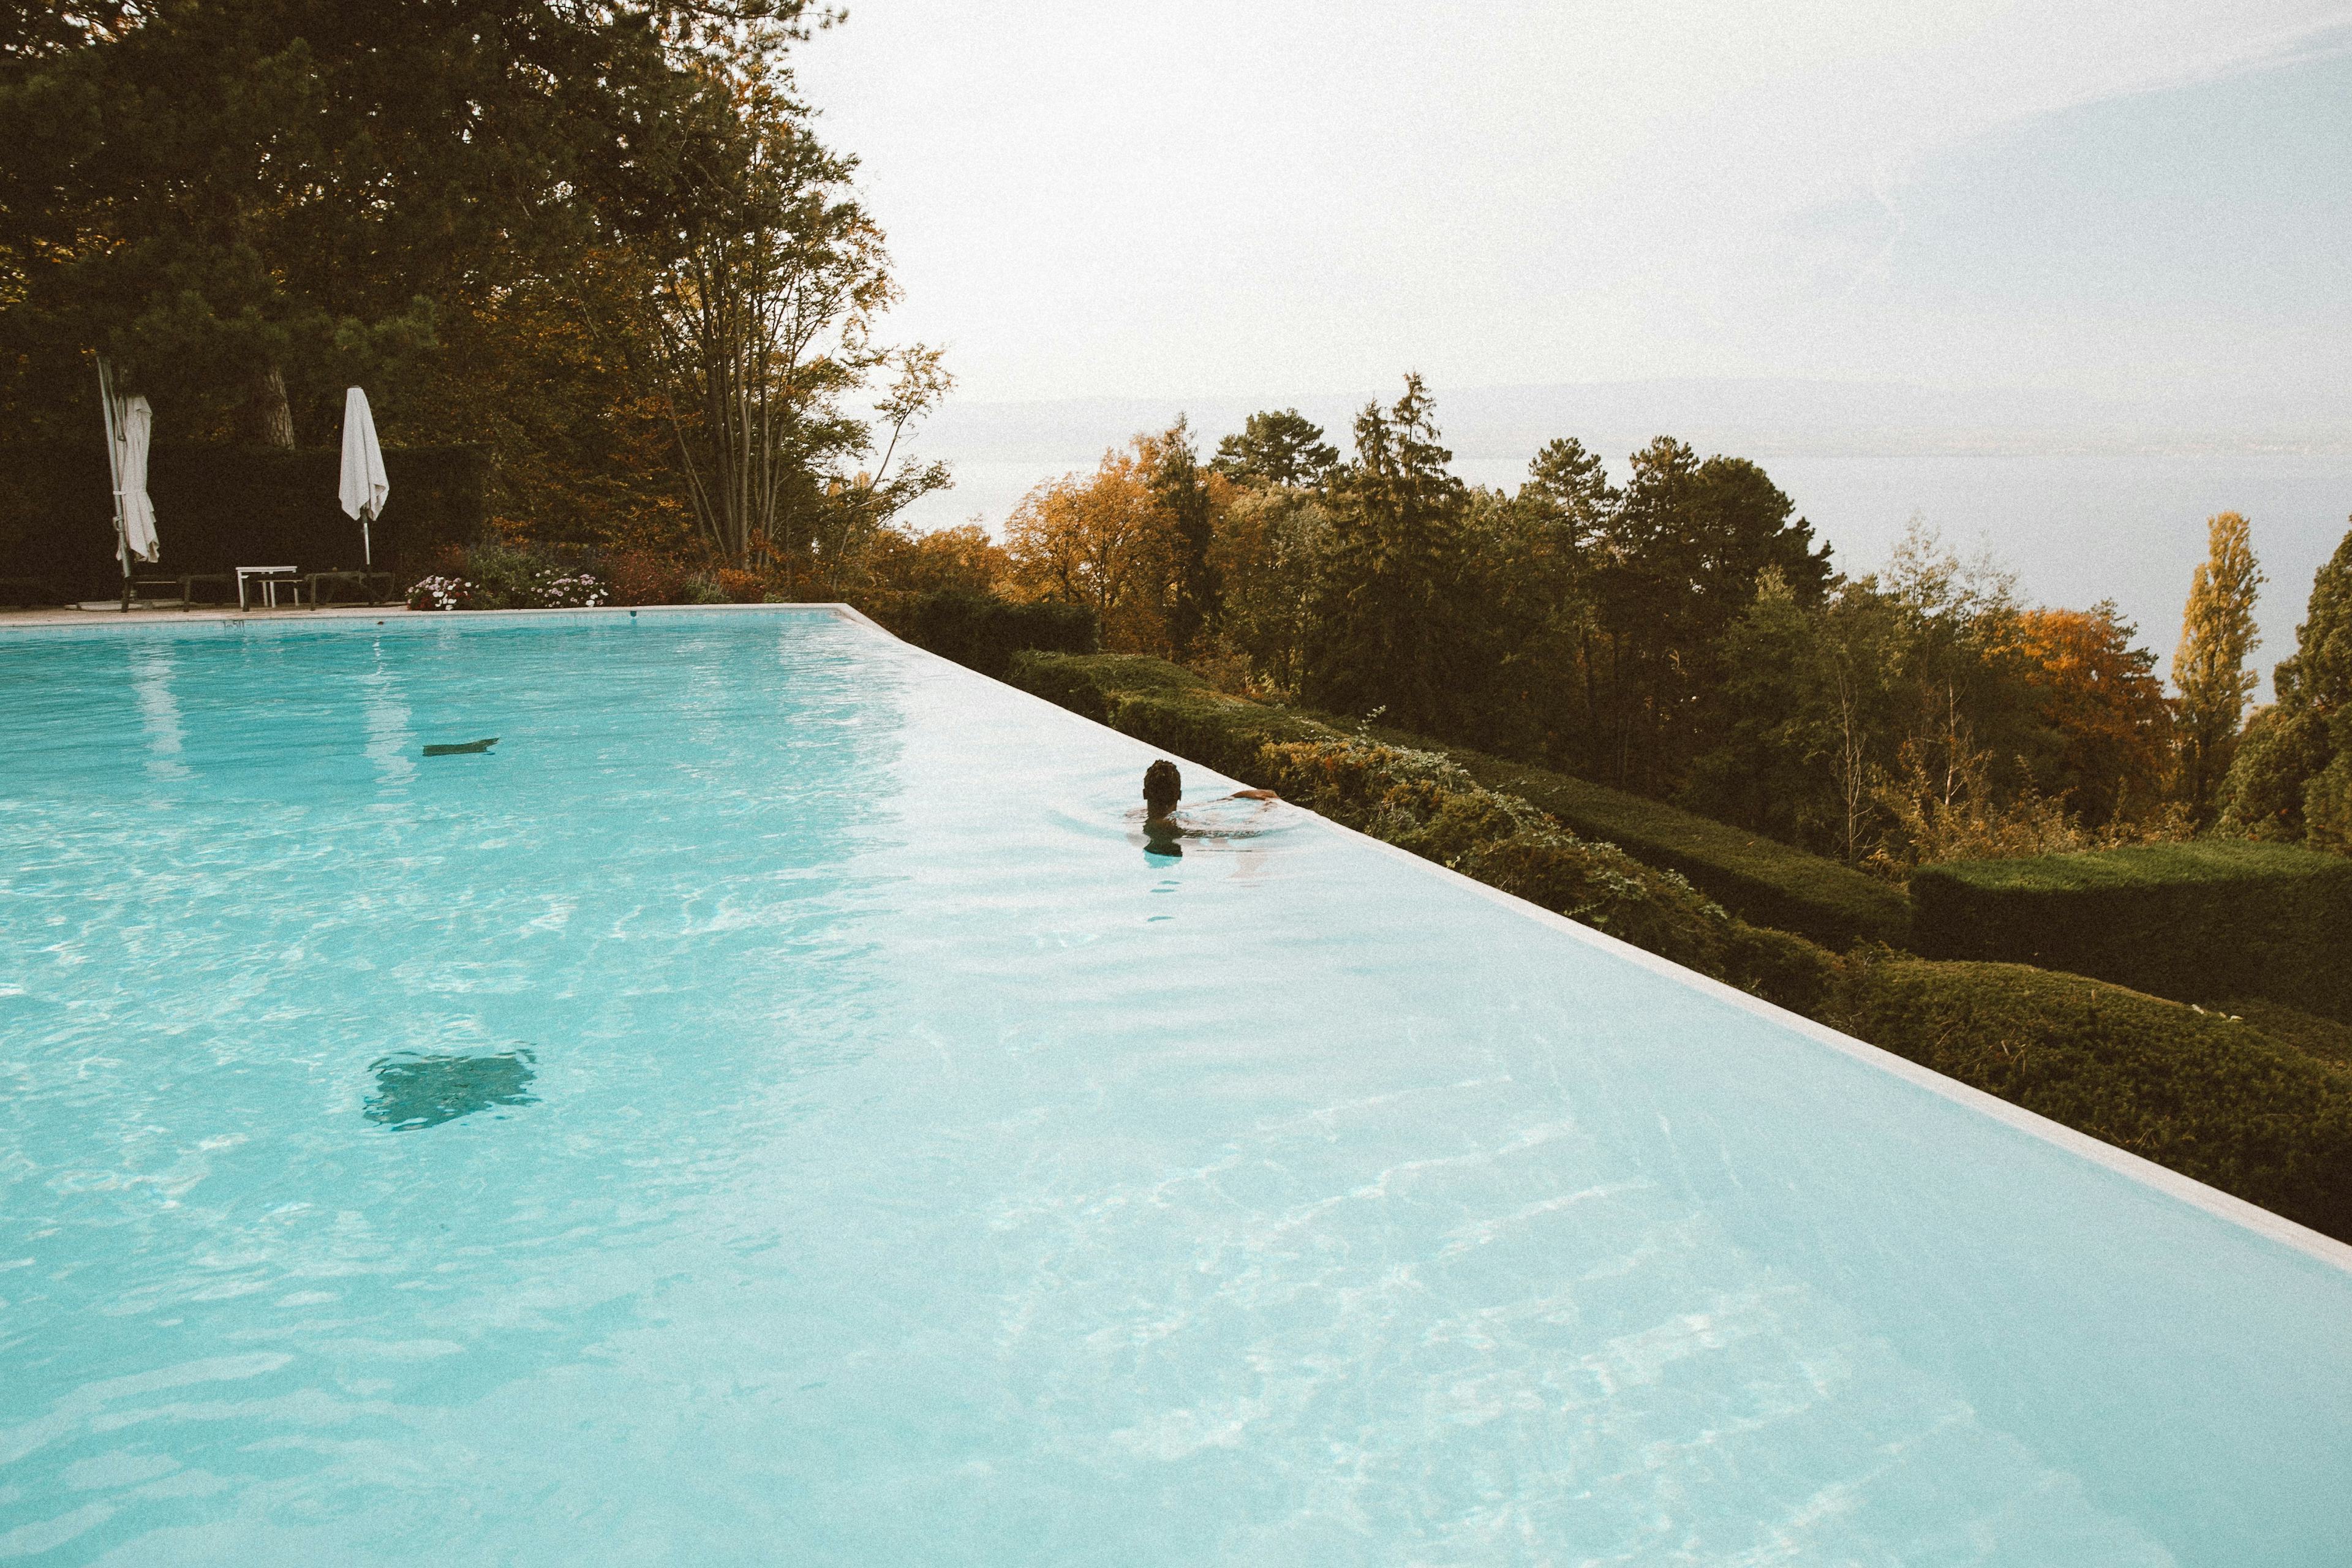 Large infinity pool with turquoise water in which a man on the edge contemplates the view of hedges and trees.  At the edge of the pool are bright folded umbrellas.